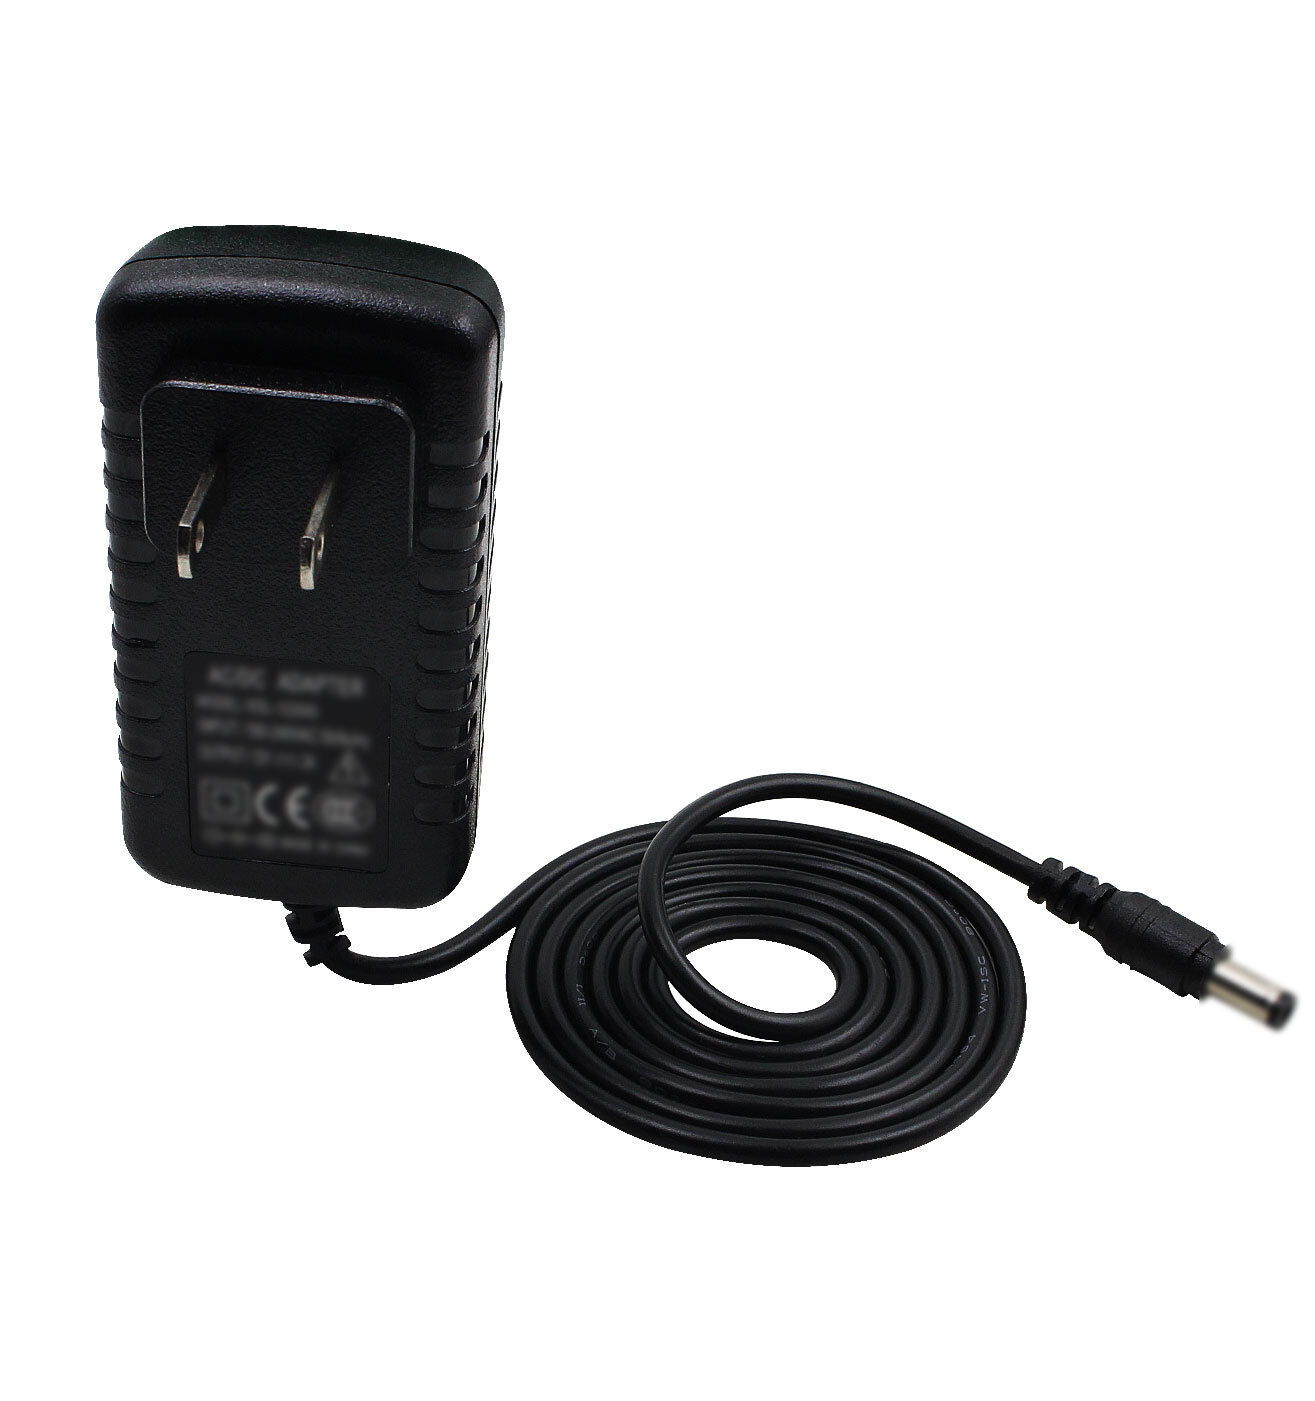 Power Supply/AC Adapter for Boss VE-20 Vocal Performer, TU-3 Chromatic Tuner AC Power Adapter Compatible with the follo